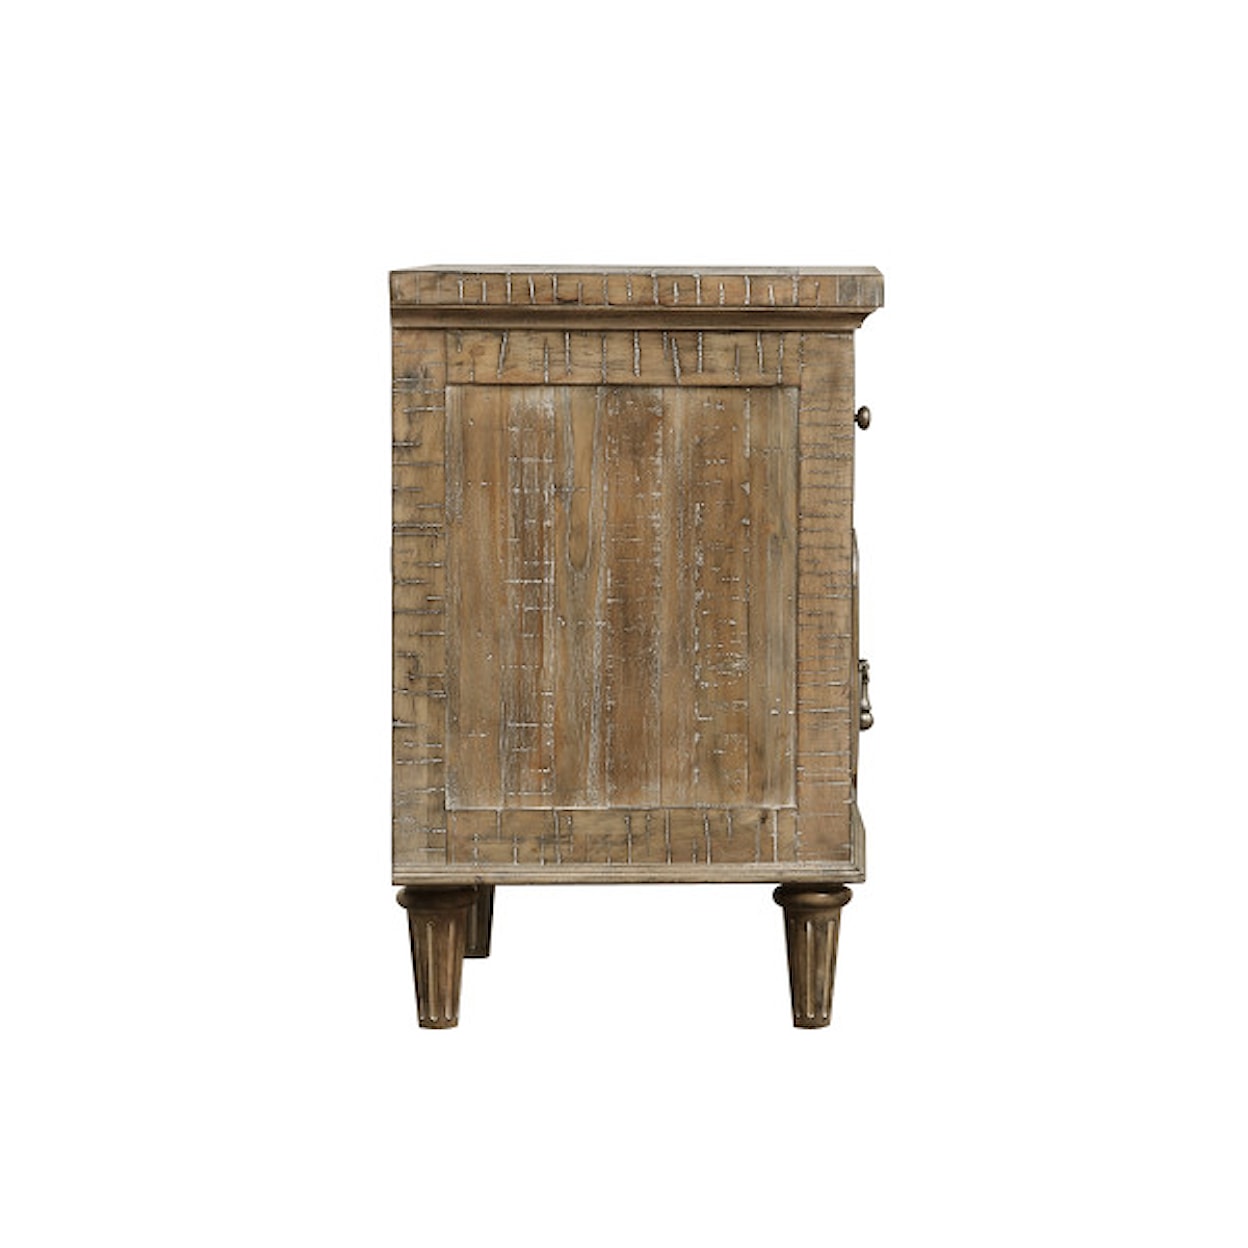 Emerald Interlude 2-Drawer Nightstand W/Power Outlet Sandstone